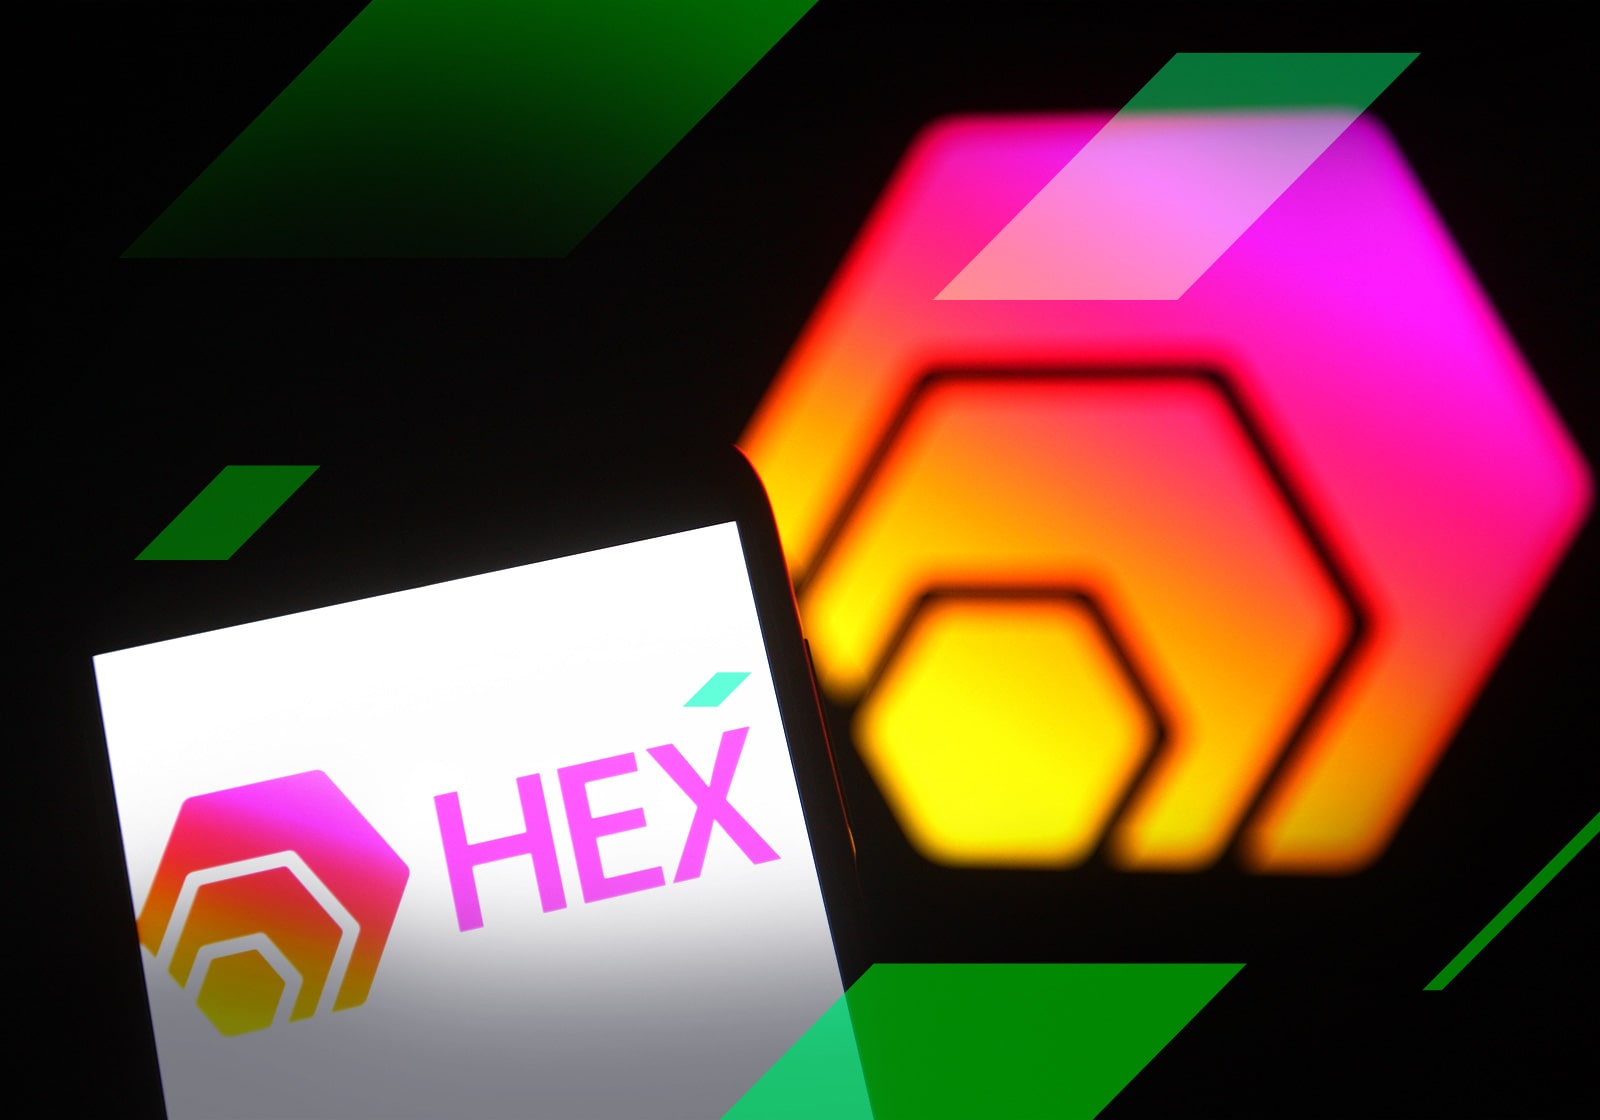 hex crypto currency price